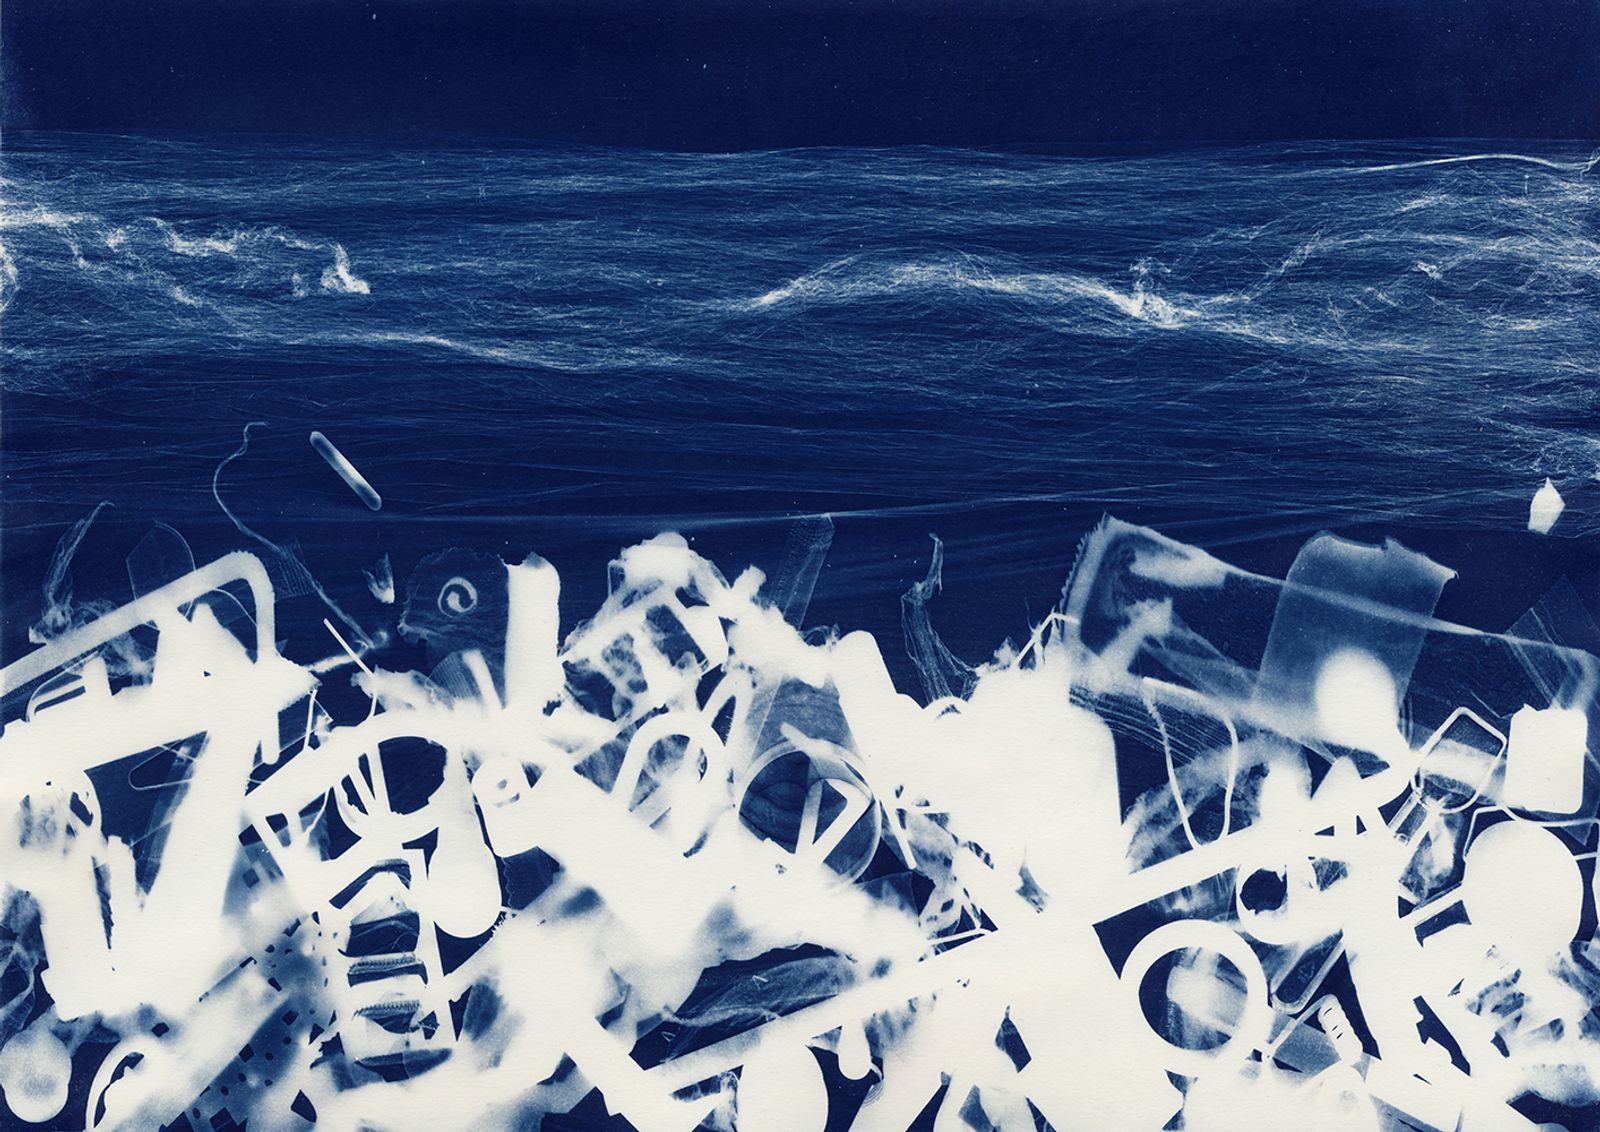 © Miltiadis Igglezos - Image from the Cyanotypes of a trashworld photography project